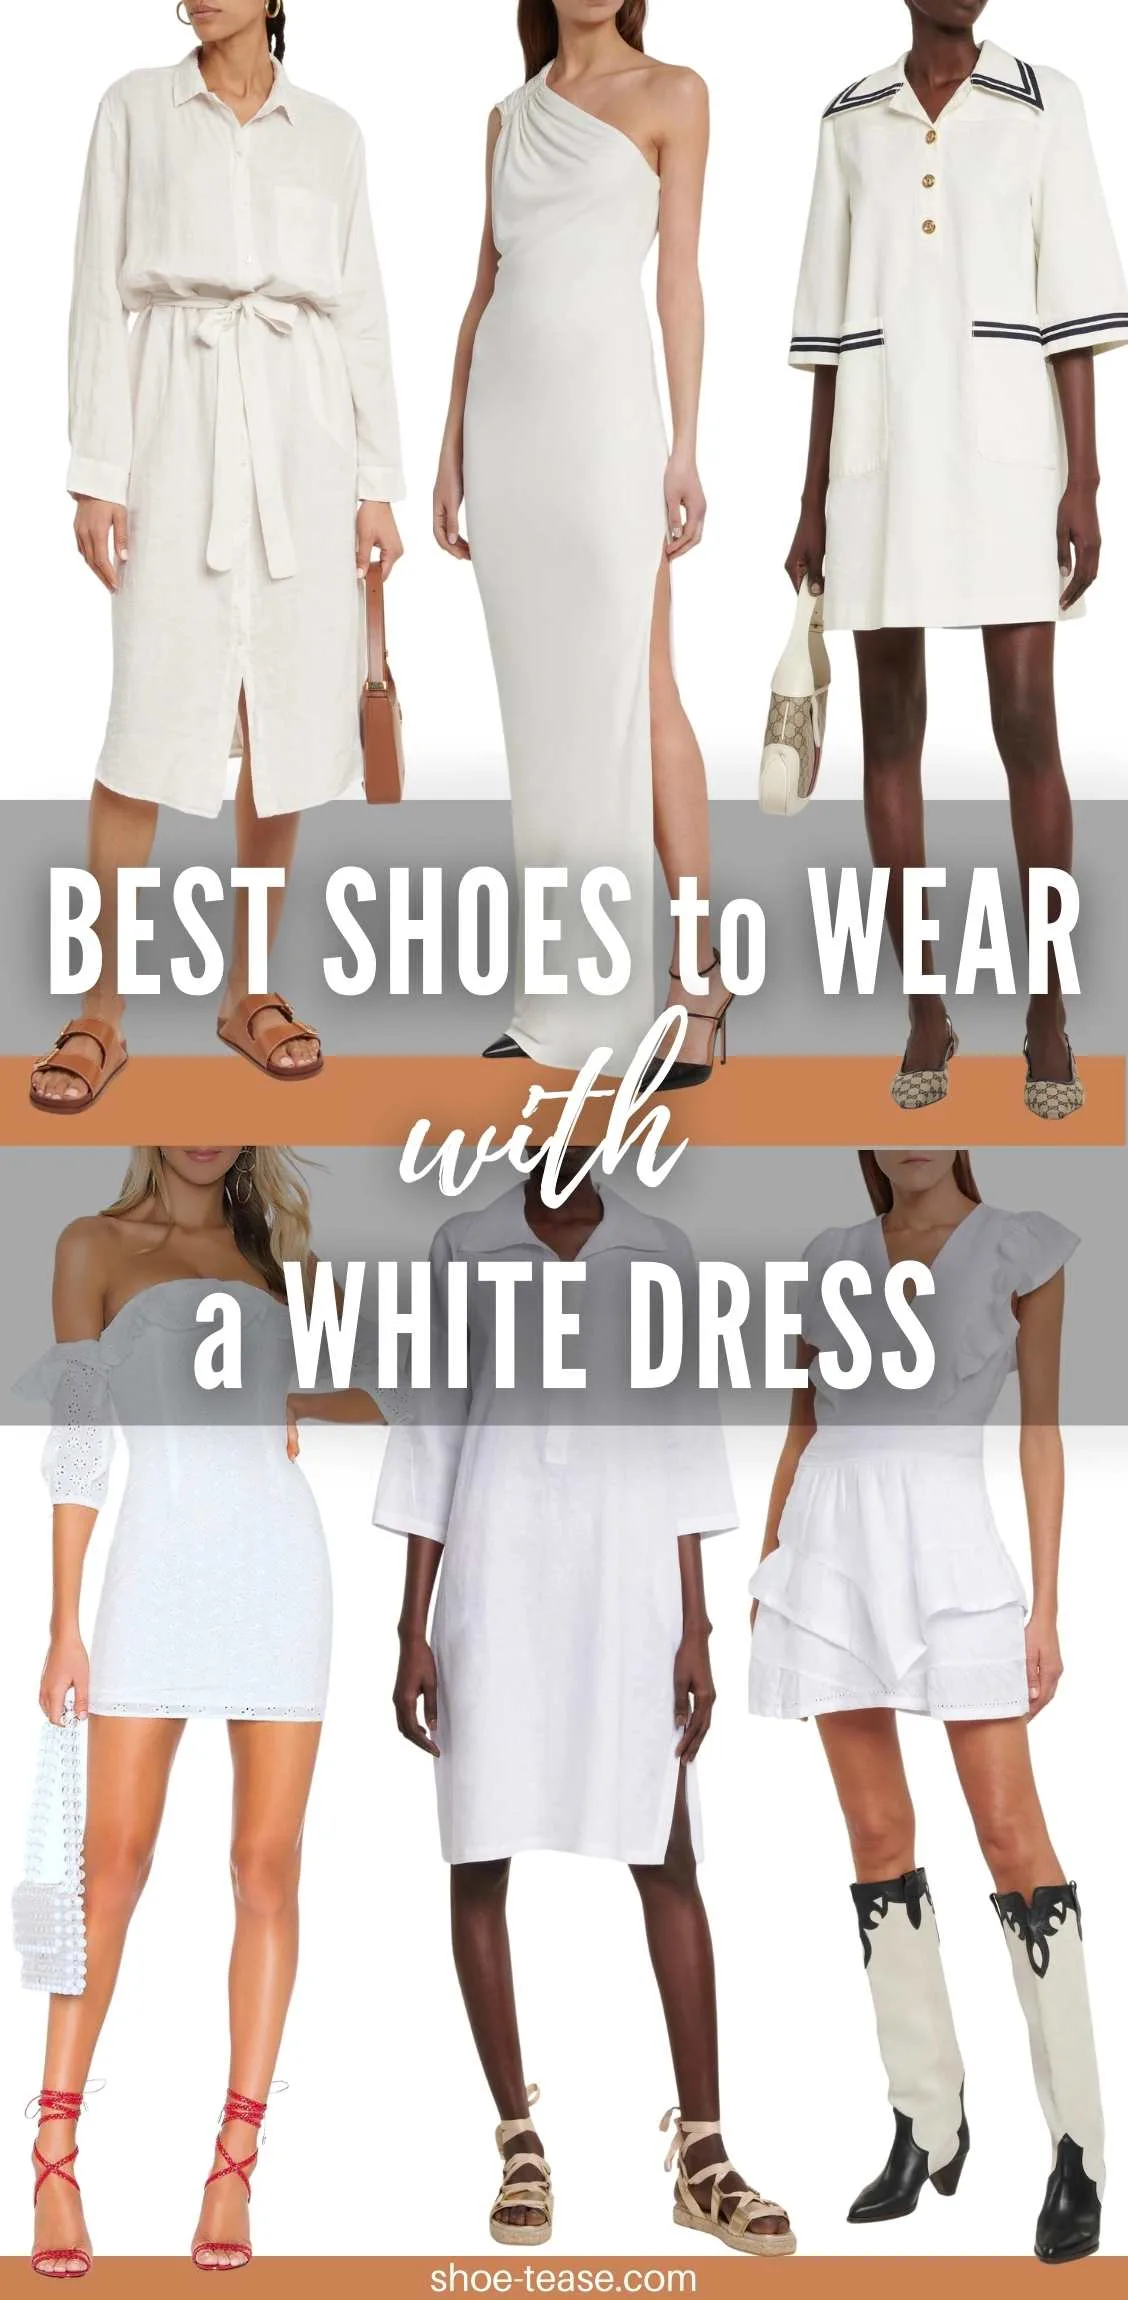 White shoes to wear with dress